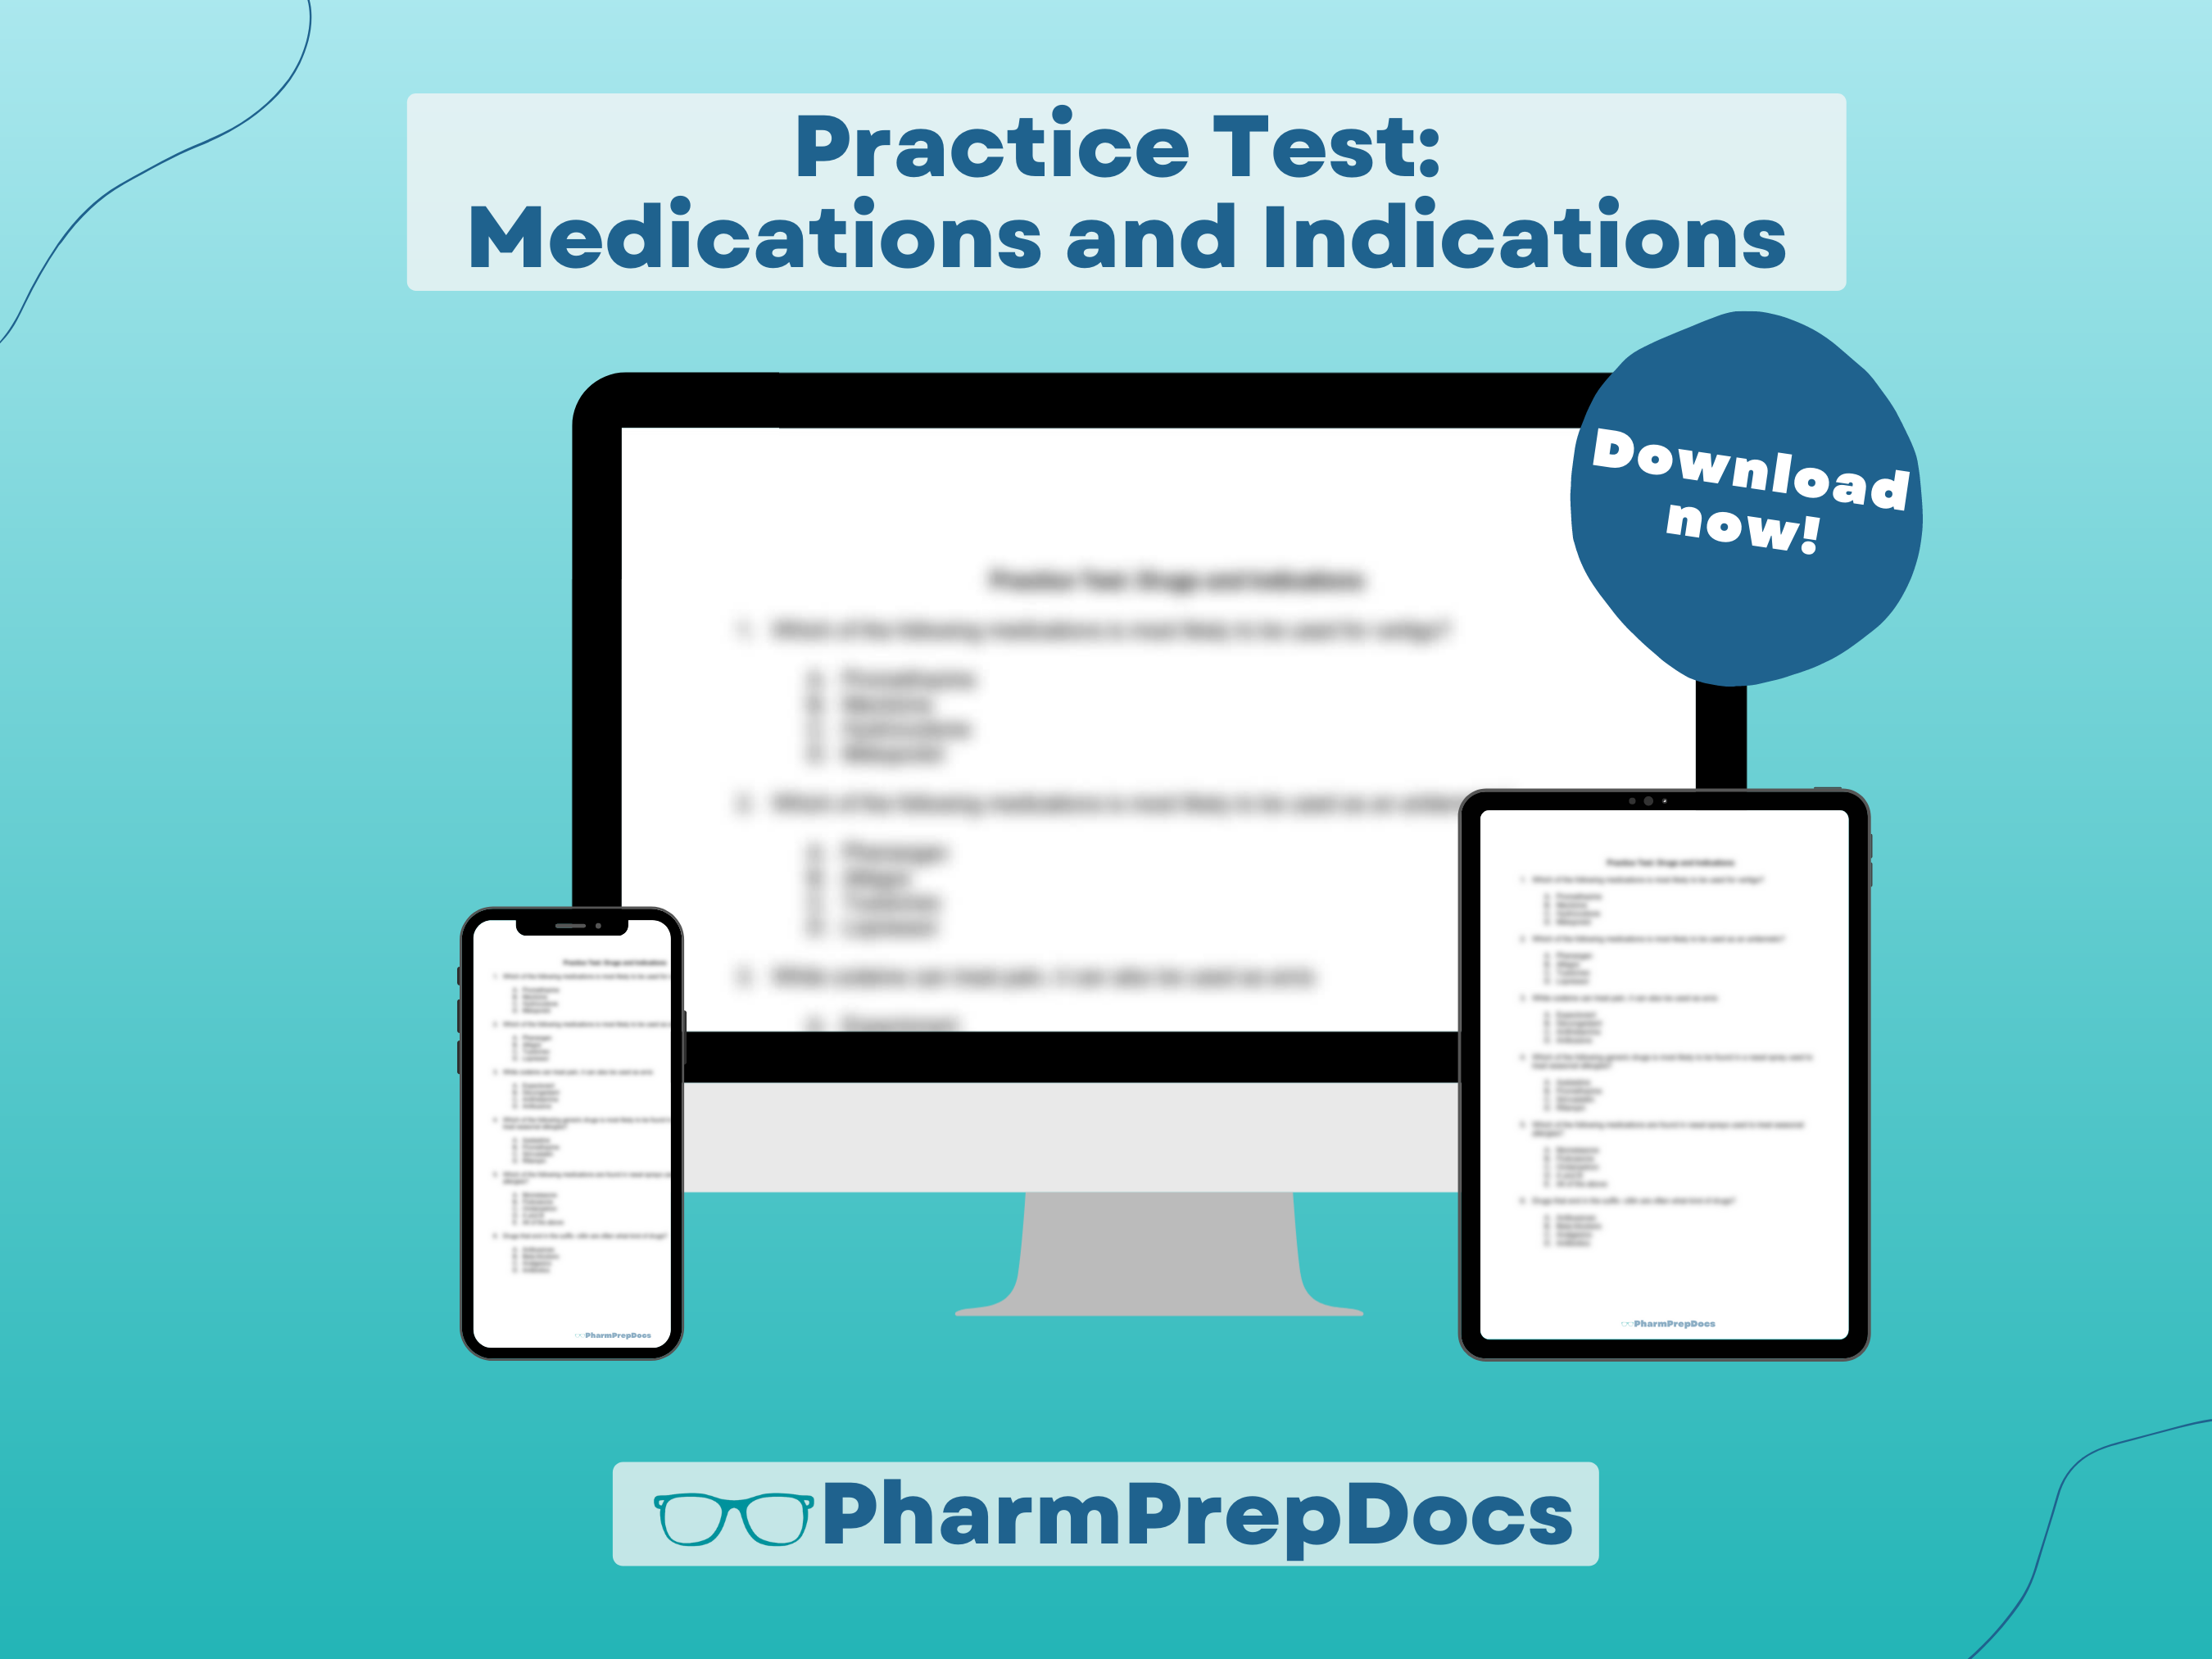 Practice Test: Medications and Indications